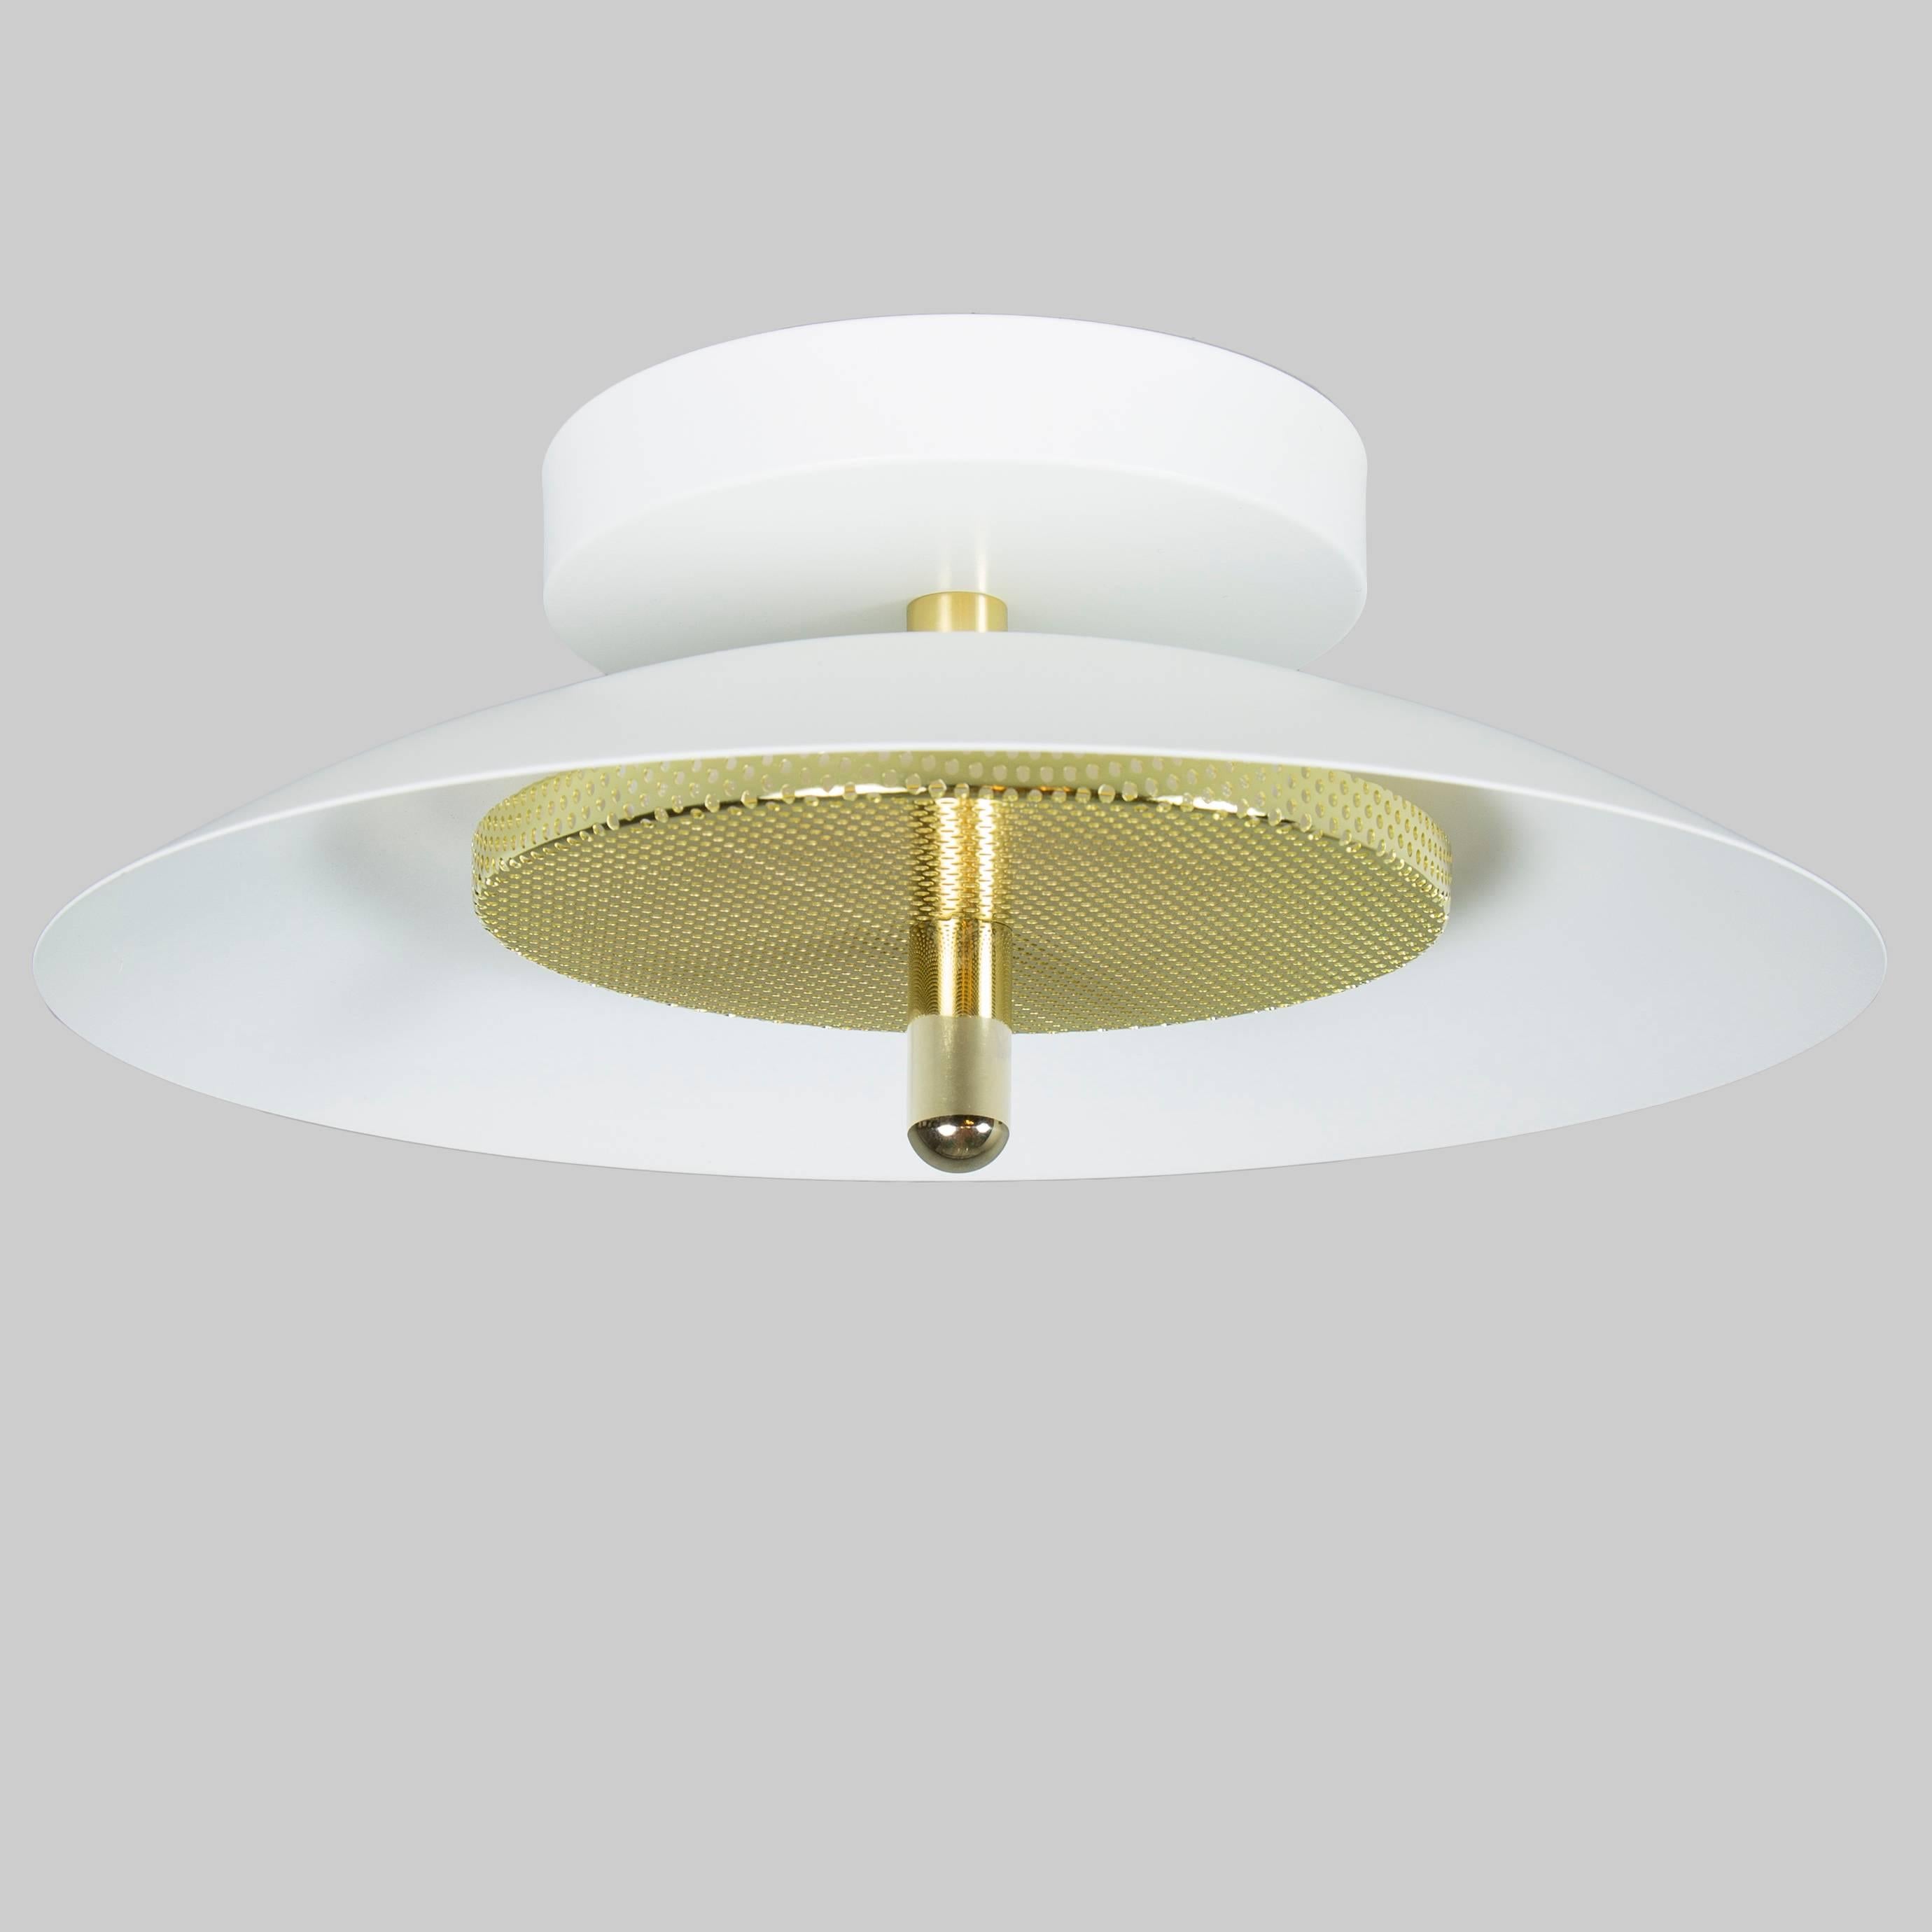 American Signal Flush Mount, White and Brass, from Souda, in Stock For Sale